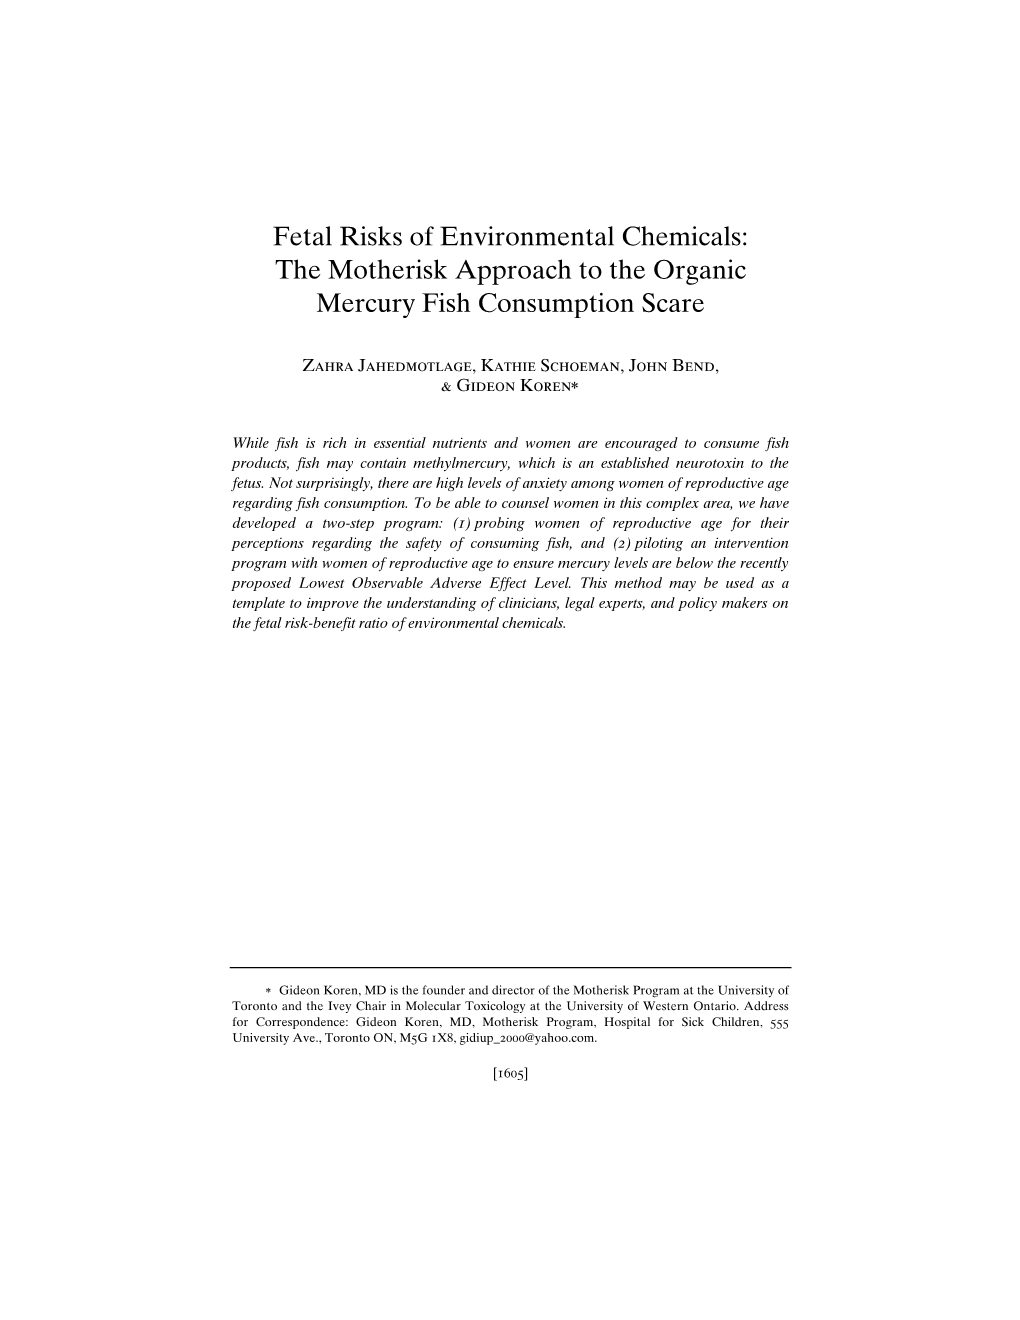 Fetal Risks of Environmental Chemicals: the Motherisk Approach to the Organic Mercury Fish Consumption Scare